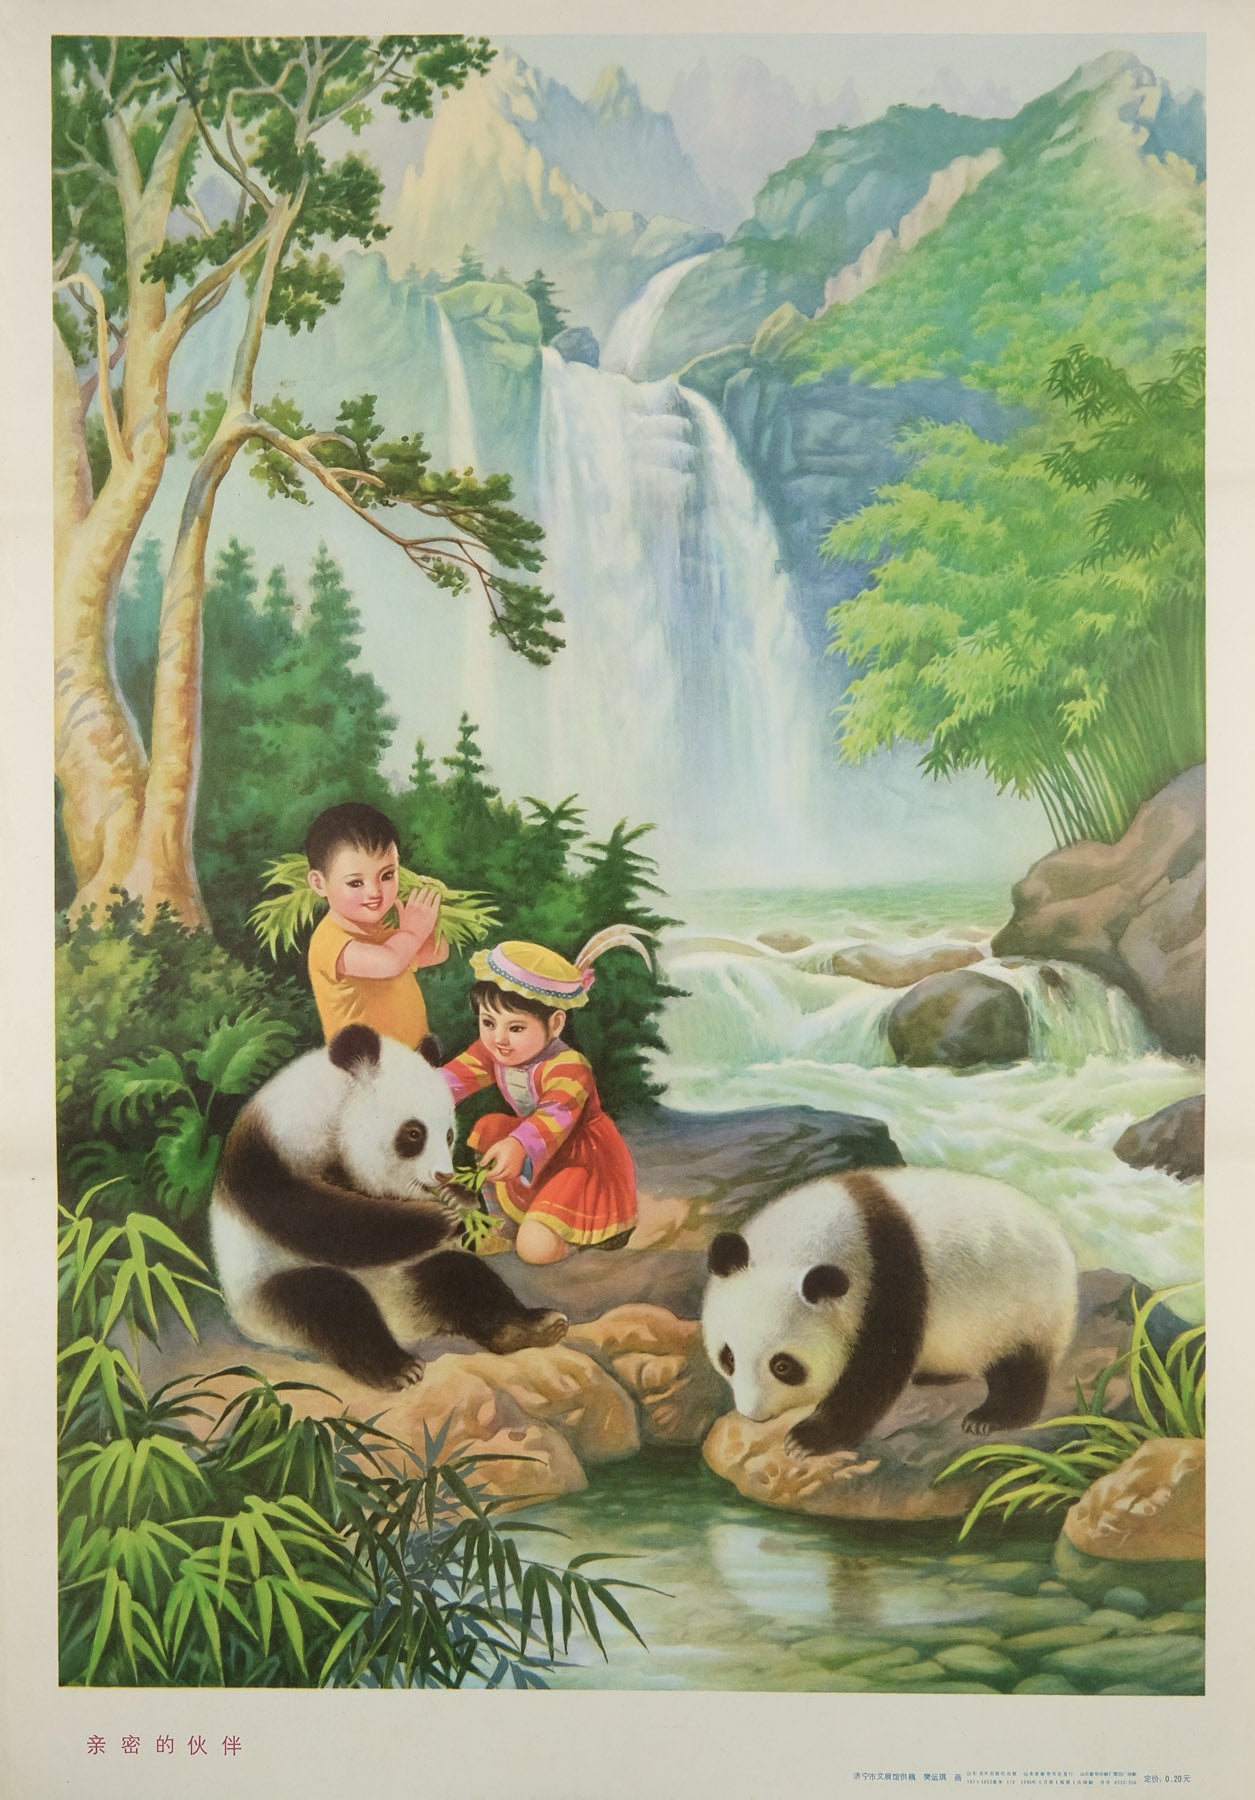 image of the original vintage 1985 Chinese communist propaganda poster by Fan Yunqi titled Close companions published by Shandong Fine Art Publishing House